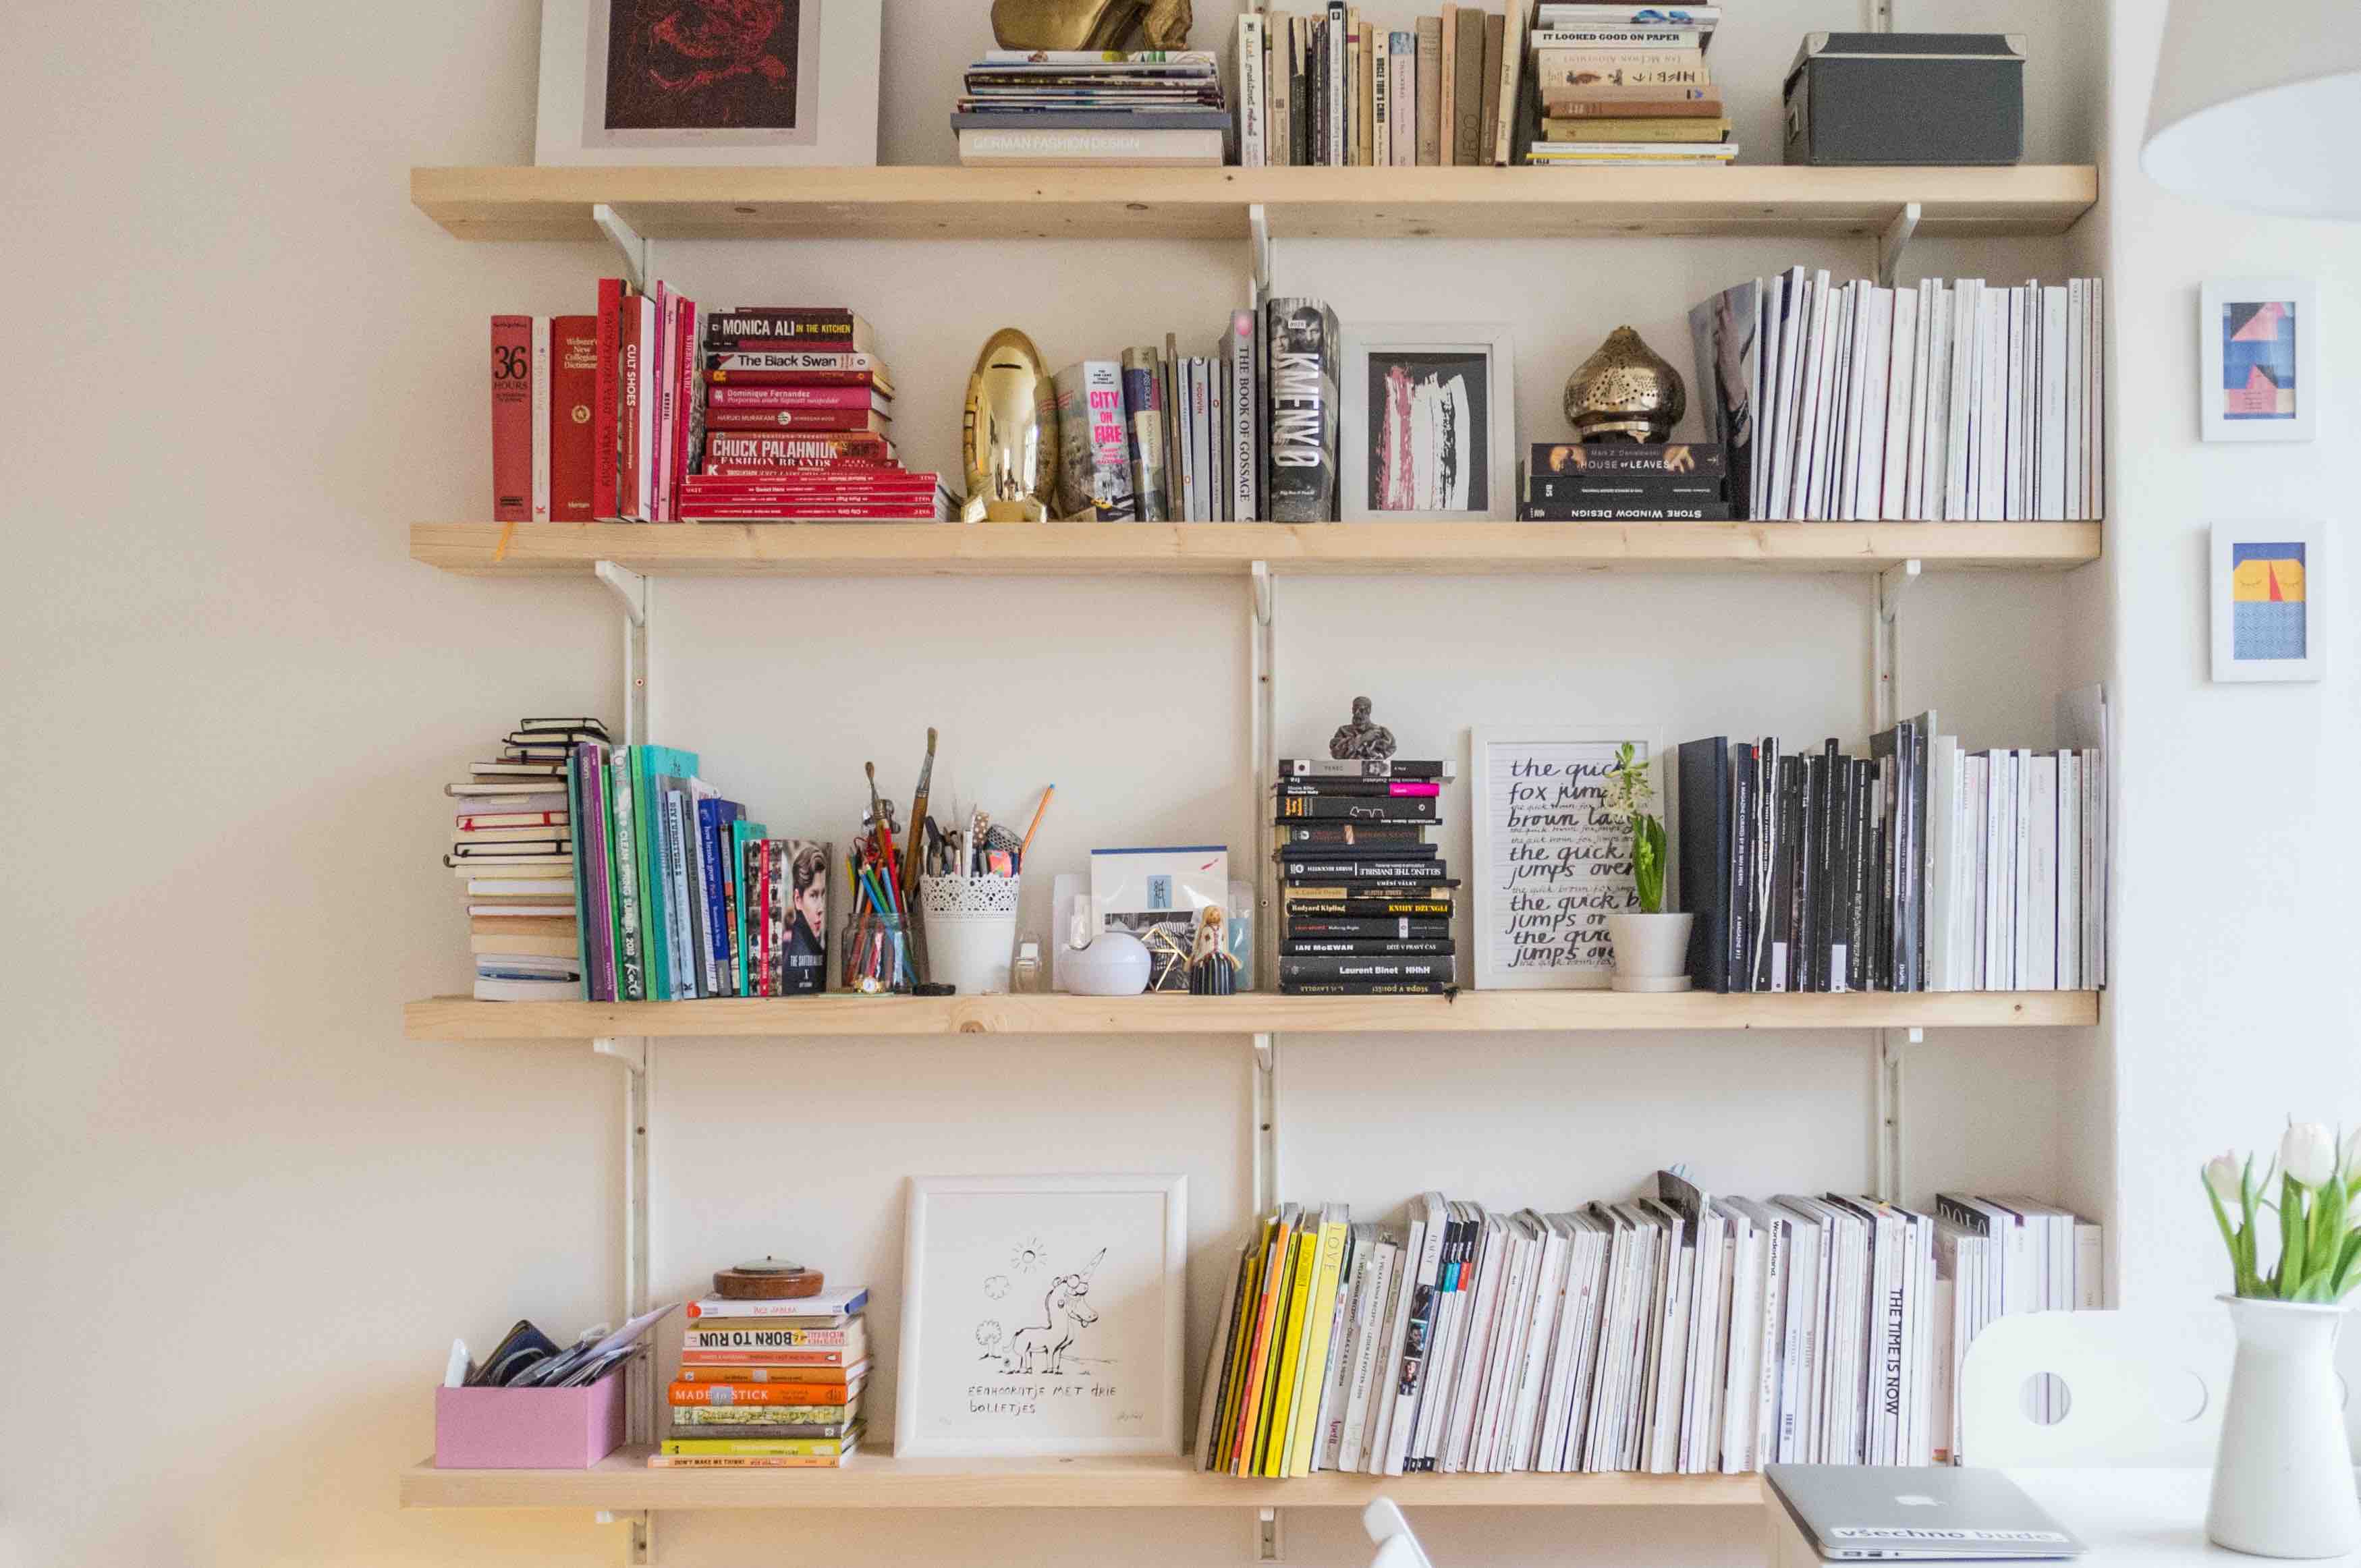 Photo of a bookshelf, styled for inspiration